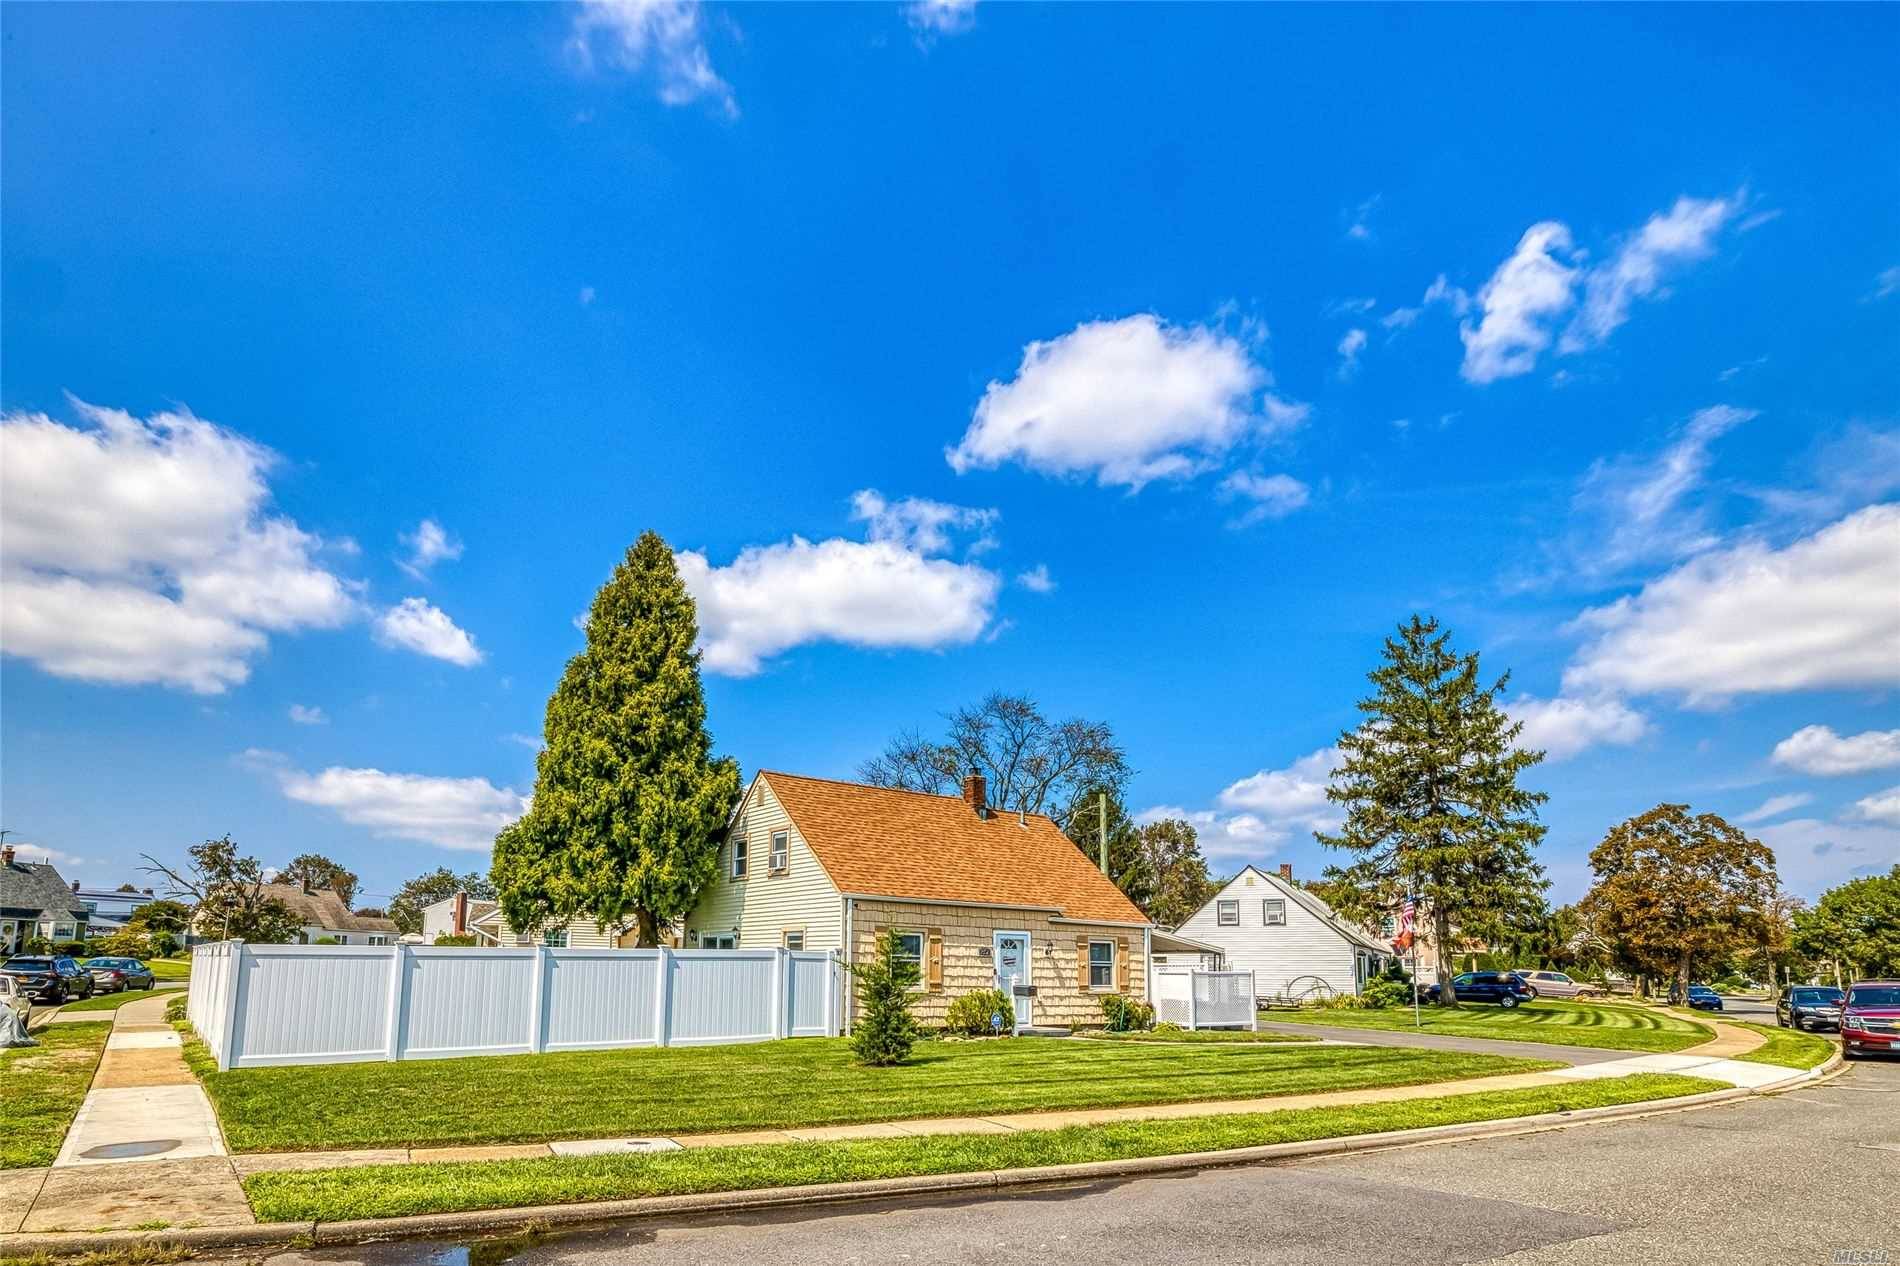 Beautifully Renovated 3 Bedroom Cape in Levittown Schools with Brand New Kitchen with White Cabinets, Granite Counters, Stainless Steel Appliances, amp ; Tile amp ; Glass Backsplash, New Bath with ...